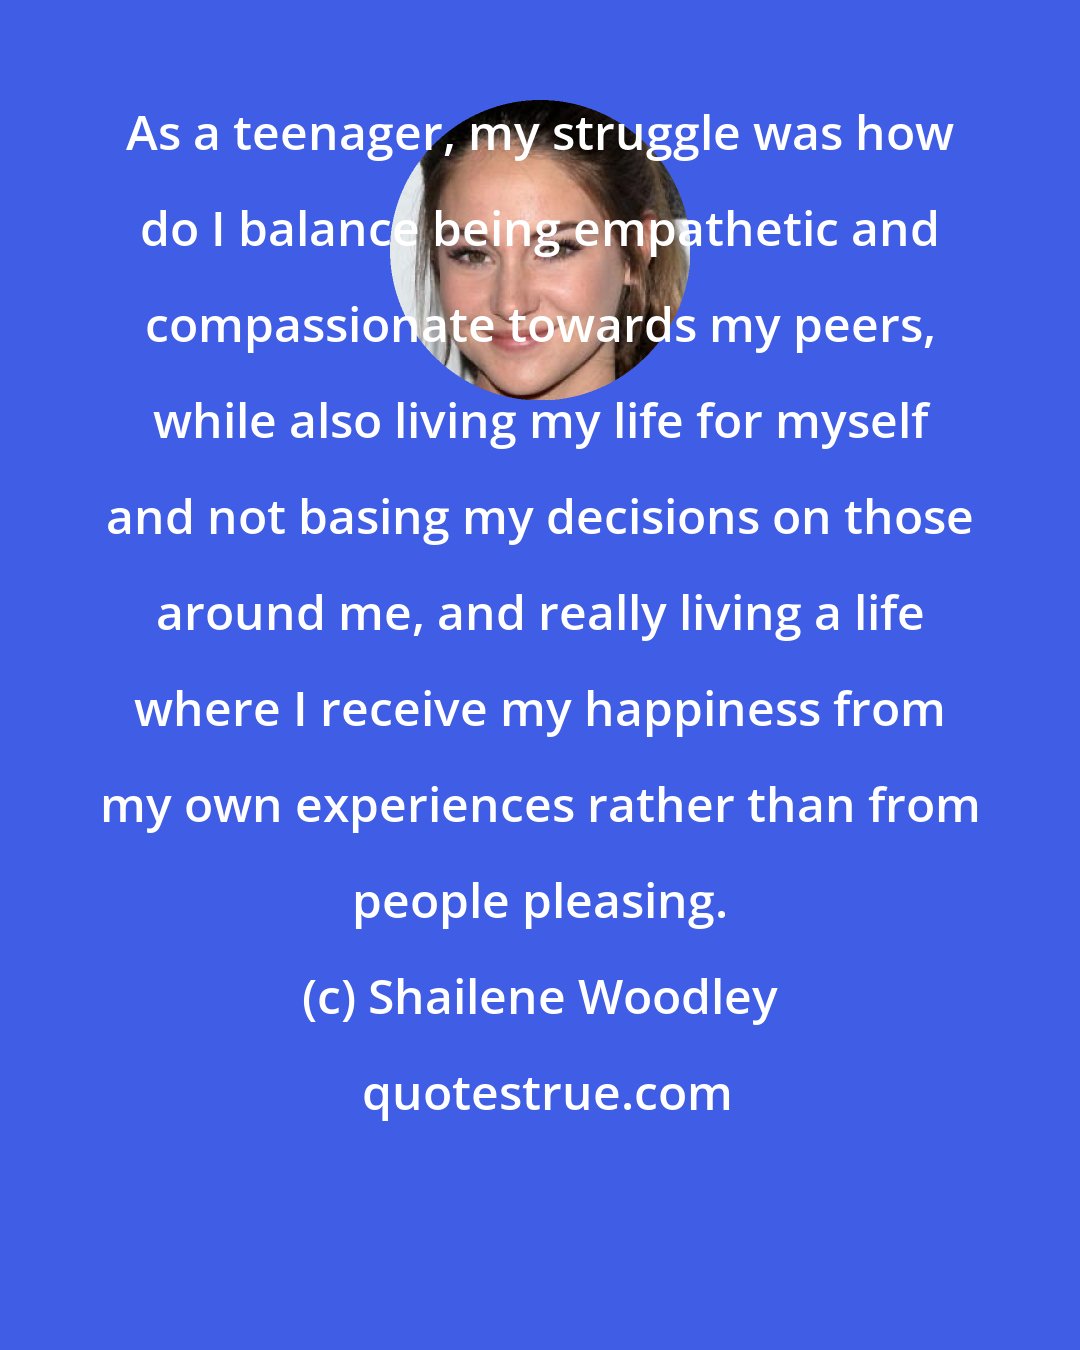 Shailene Woodley: As a teenager, my struggle was how do I balance being empathetic and compassionate towards my peers, while also living my life for myself and not basing my decisions on those around me, and really living a life where I receive my happiness from my own experiences rather than from people pleasing.